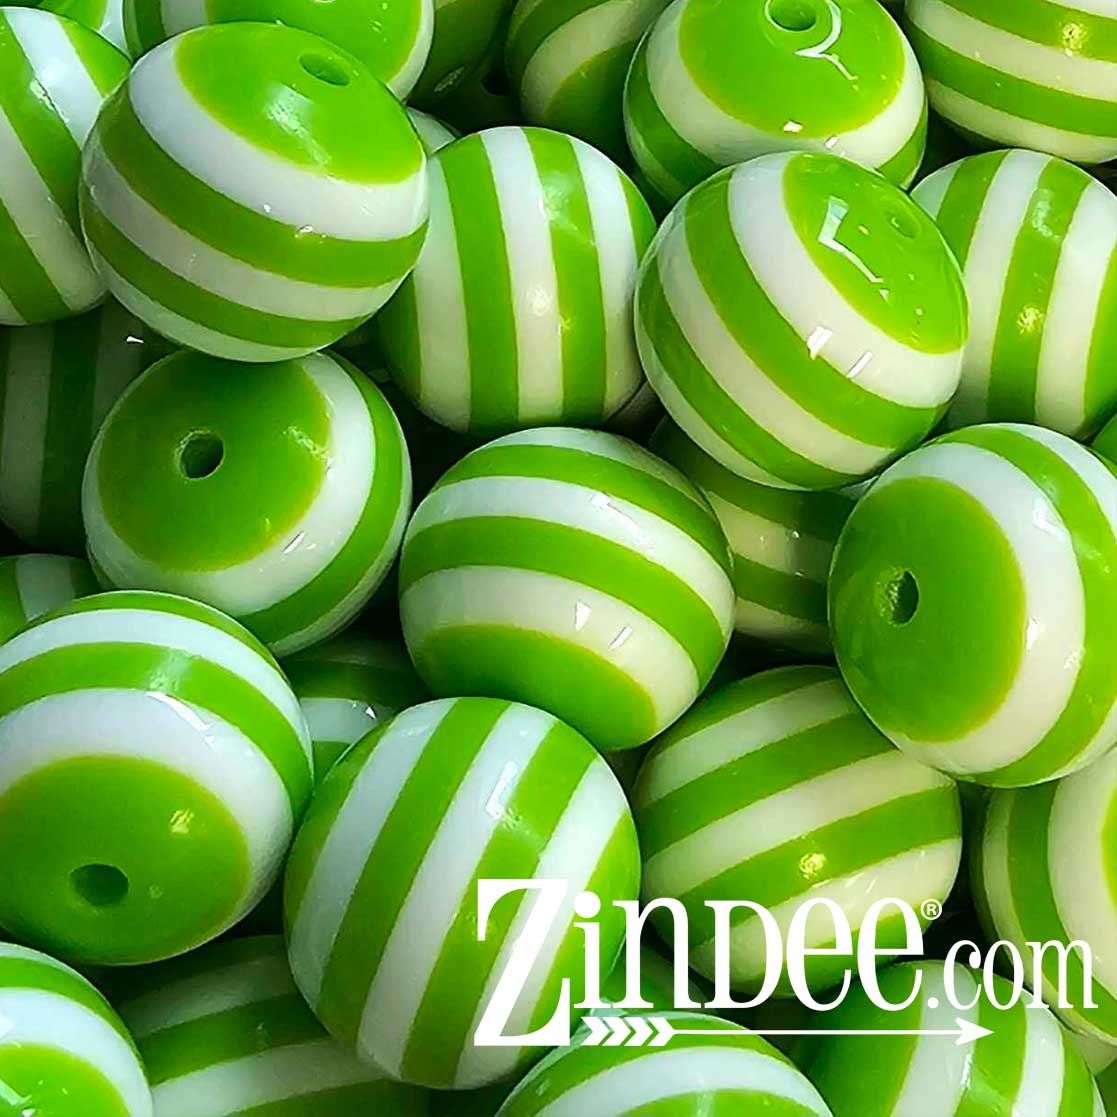 Lime Stripe (Beads) 20mm 12 pack –